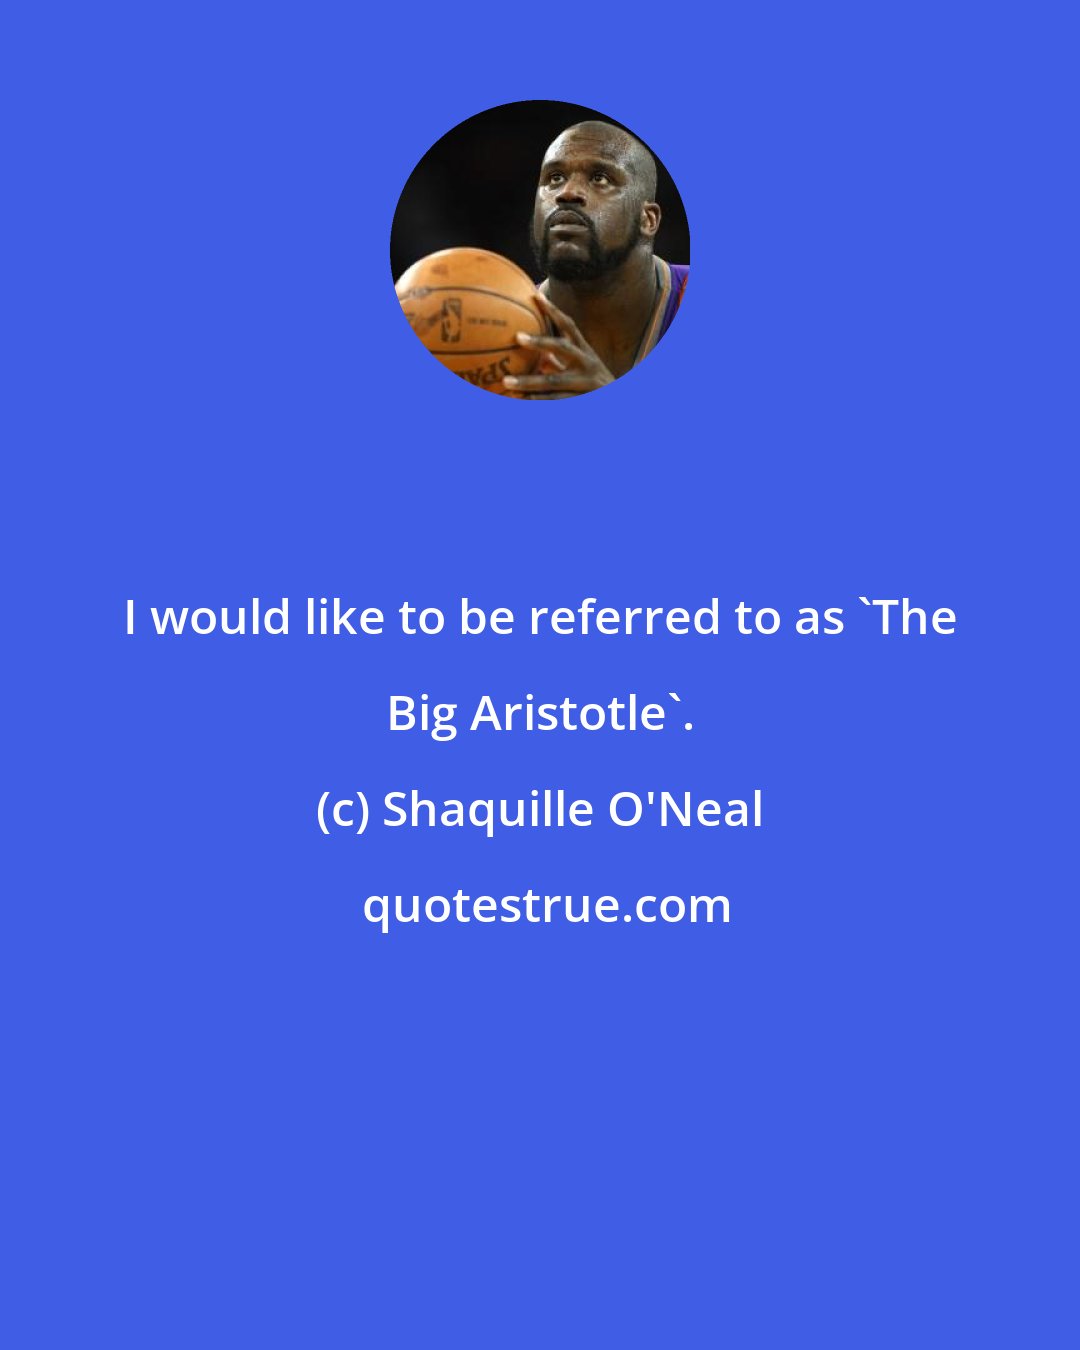 Shaquille O'Neal: I would like to be referred to as 'The Big Aristotle'.